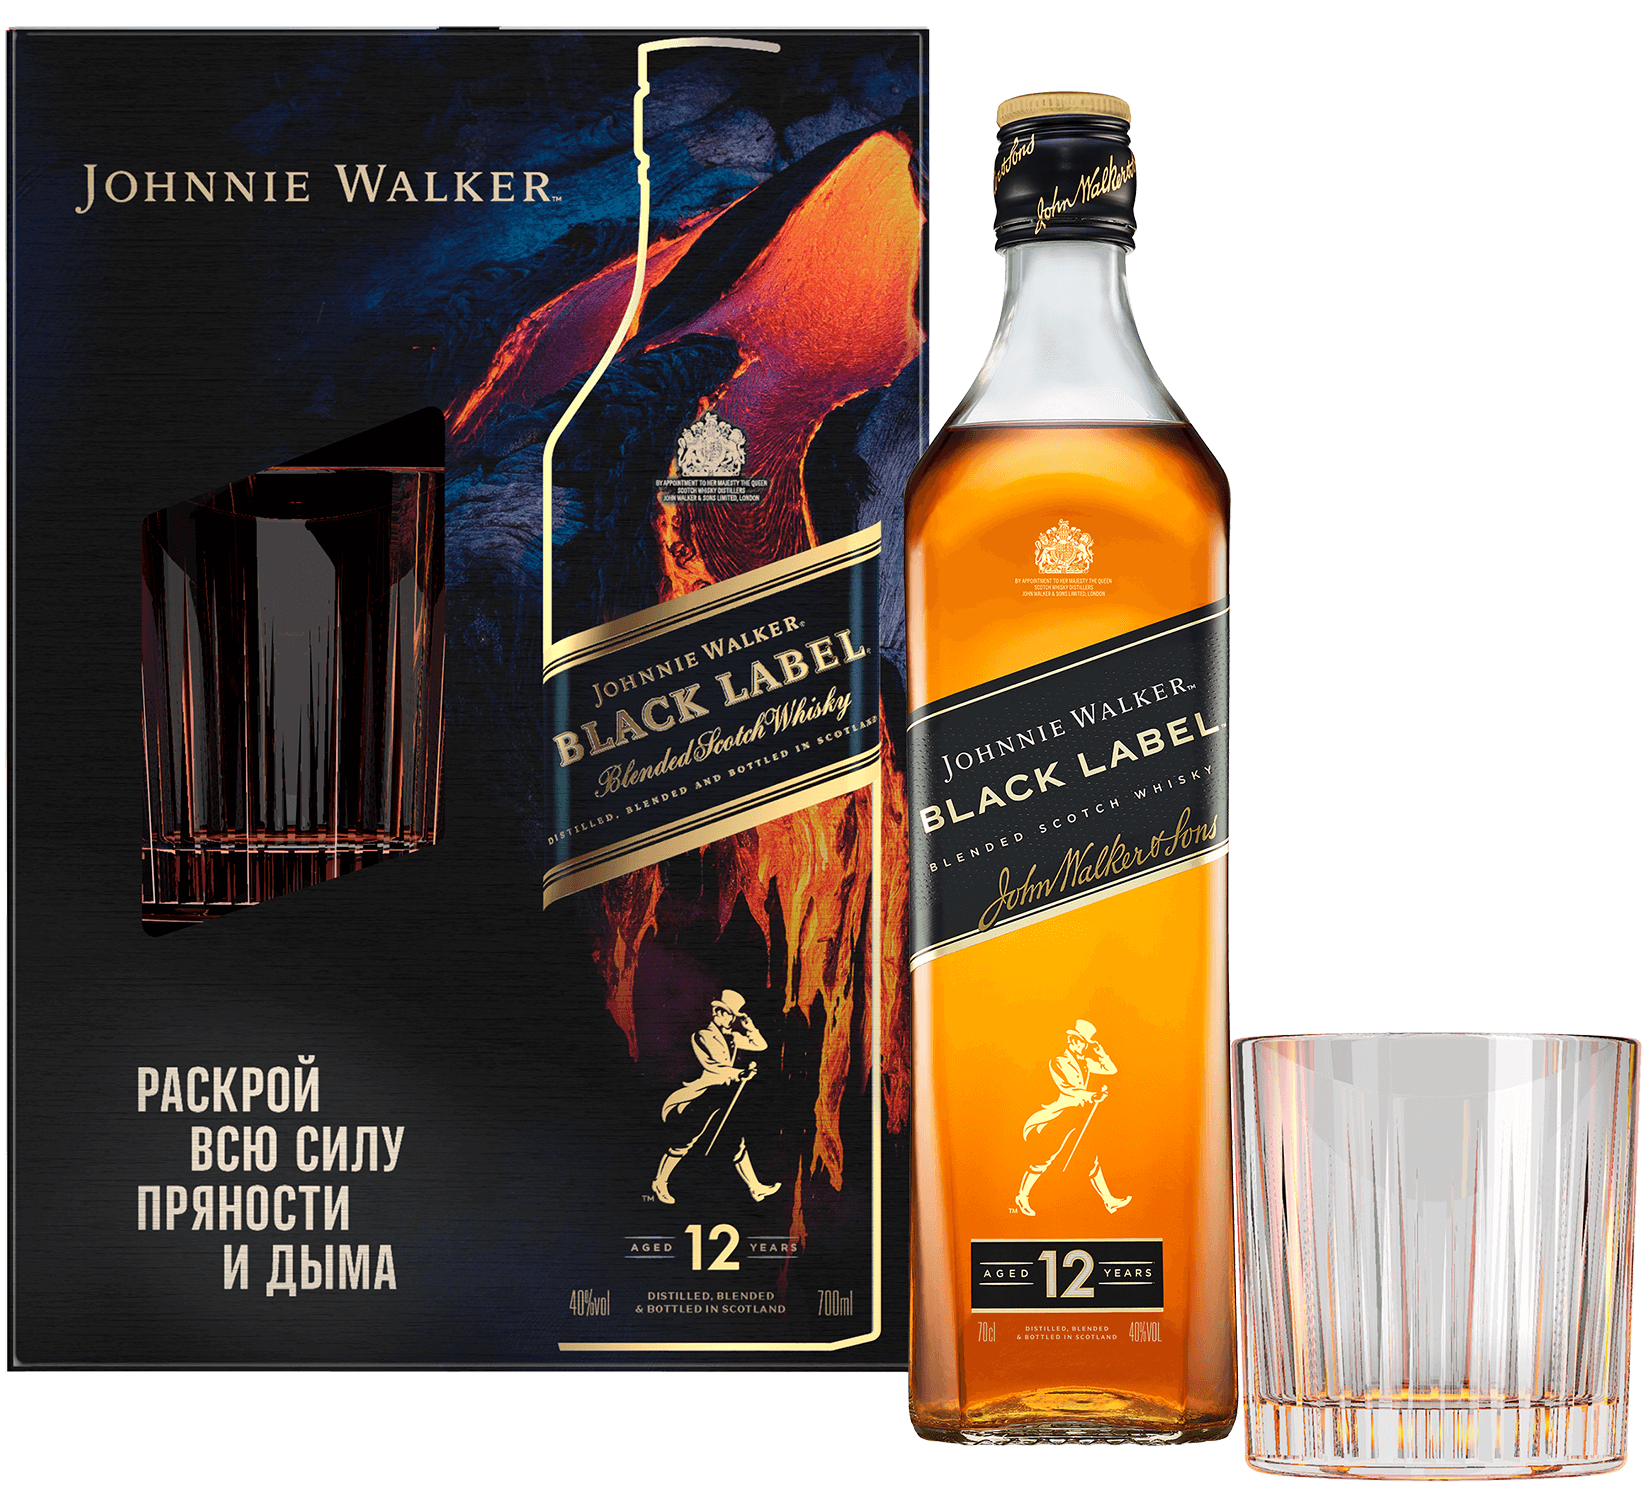 Johnnie Walker Black Label Blended Scotch Whisky (gift box with a glass) johnnie walker gold label blended scotch whisky gift box